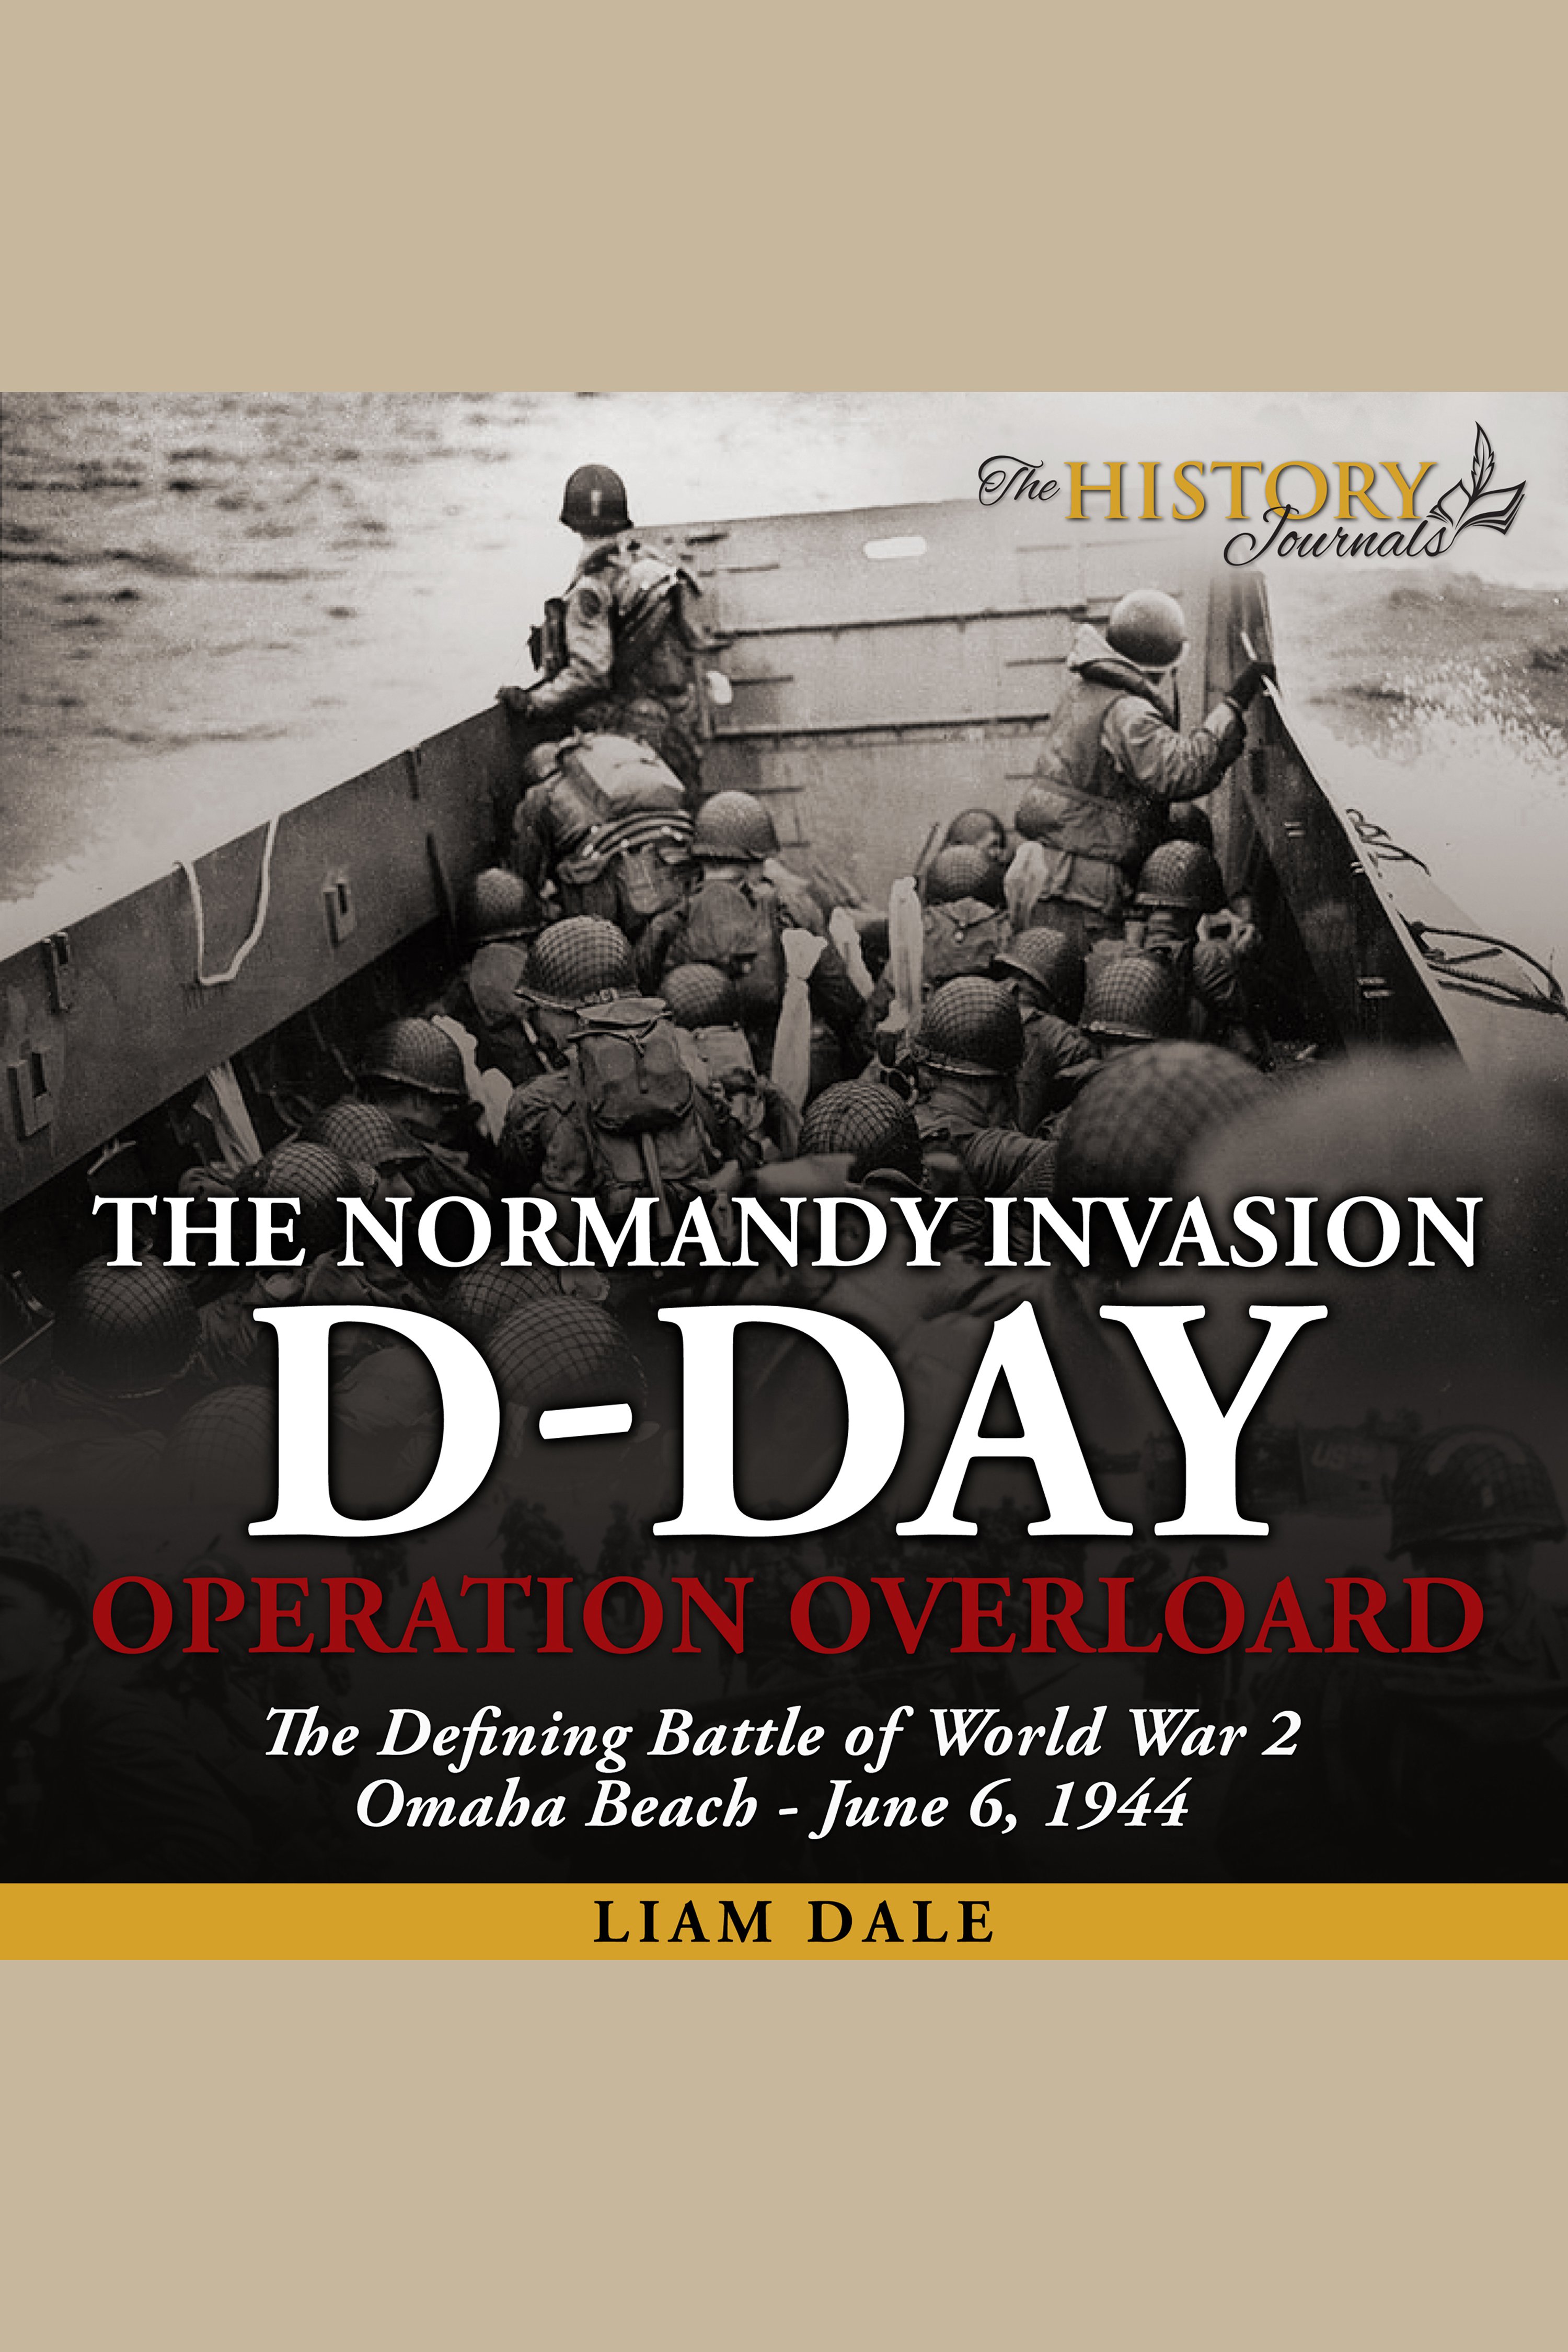 D-Day: The Normandy Invasion Operation Overlord - The Defining Battle of World War 2 - June 6, 1944 cover image